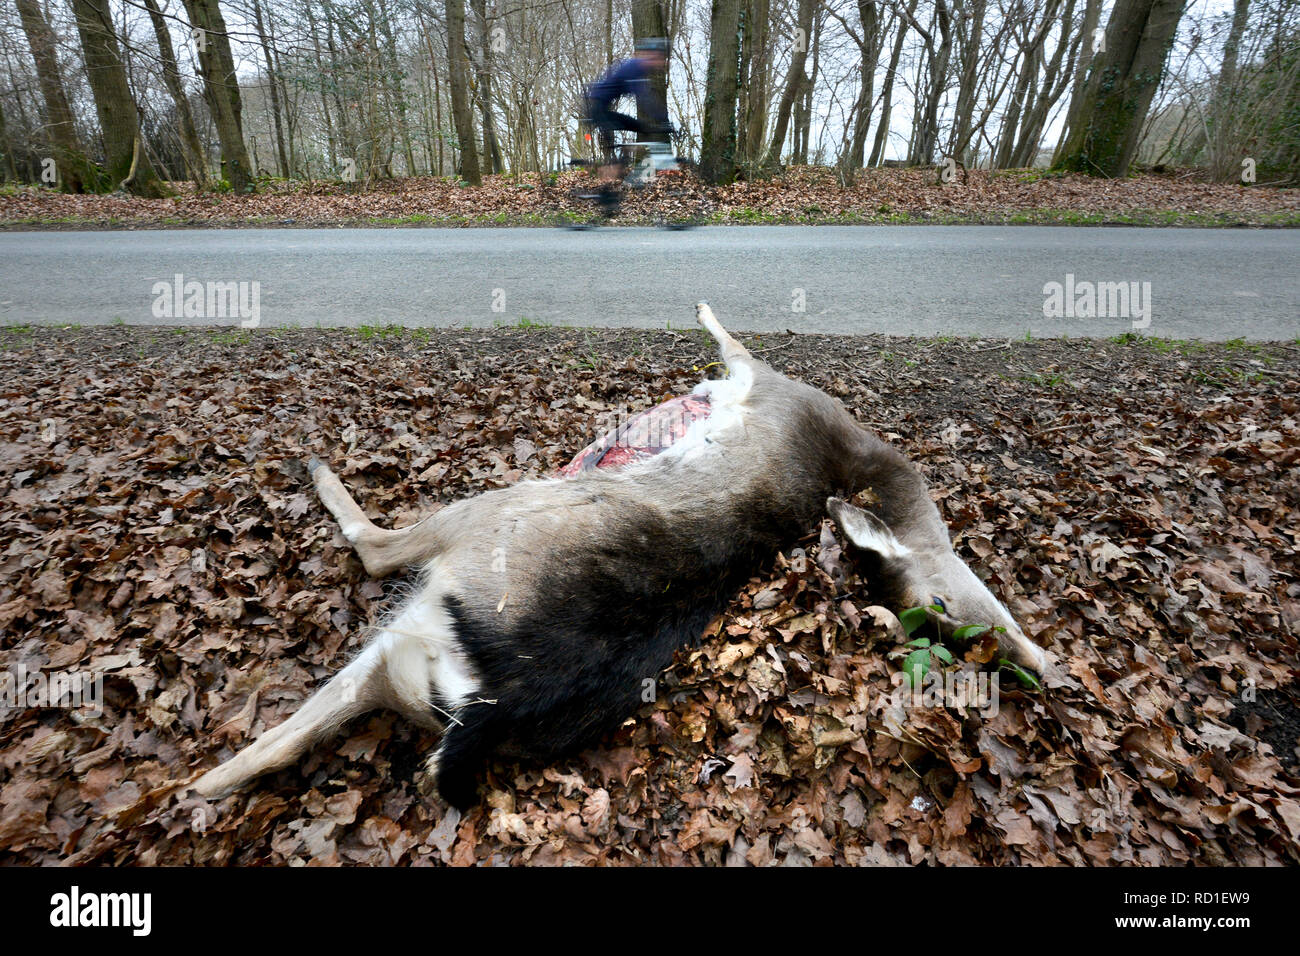 Roadkill roe deer by the side of a road. Stock Photo